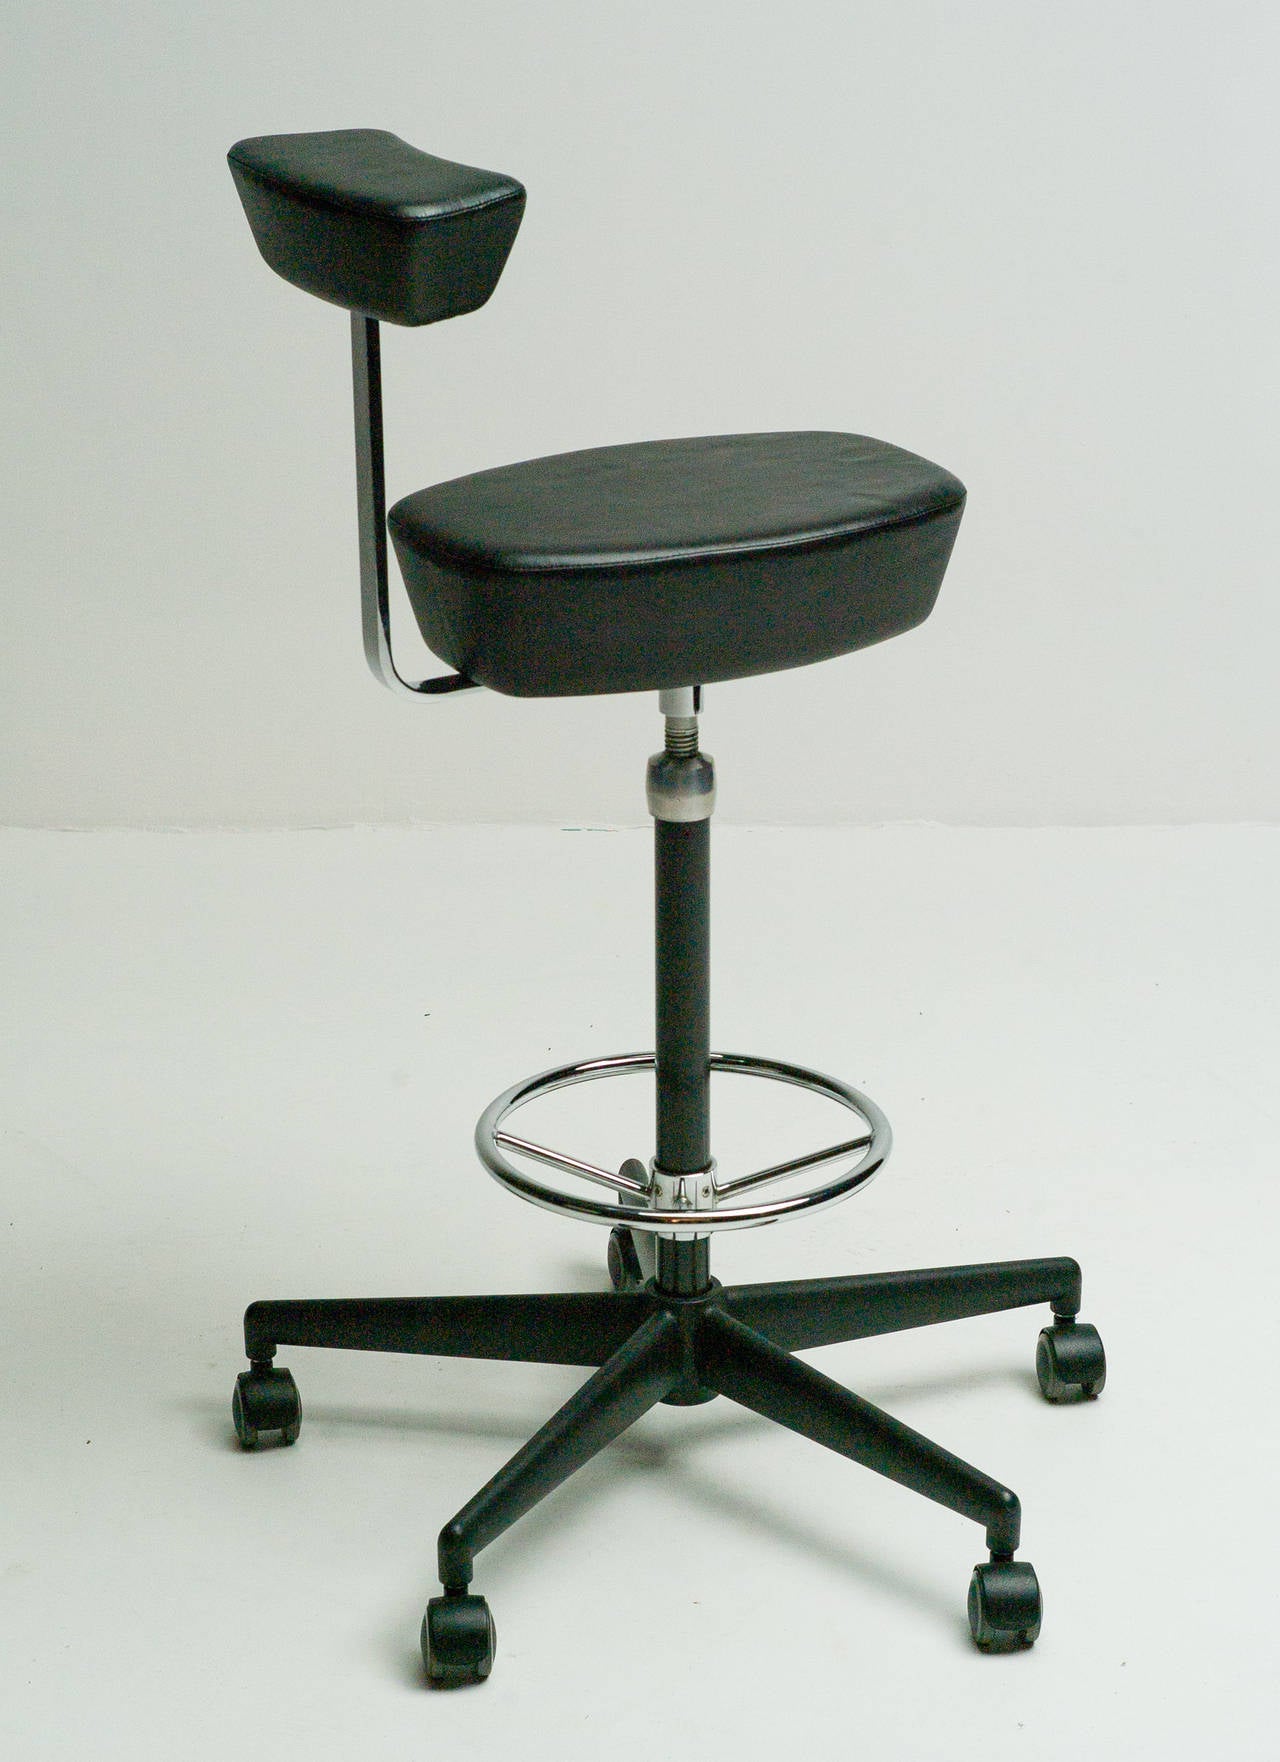 Perch stool, drafting chair designed by George Nelson and Robert Propst.
Black leather, black base. Vitra edition.
Competitive worldwide shipping available. Please ask for our in-house crating and shipping services.